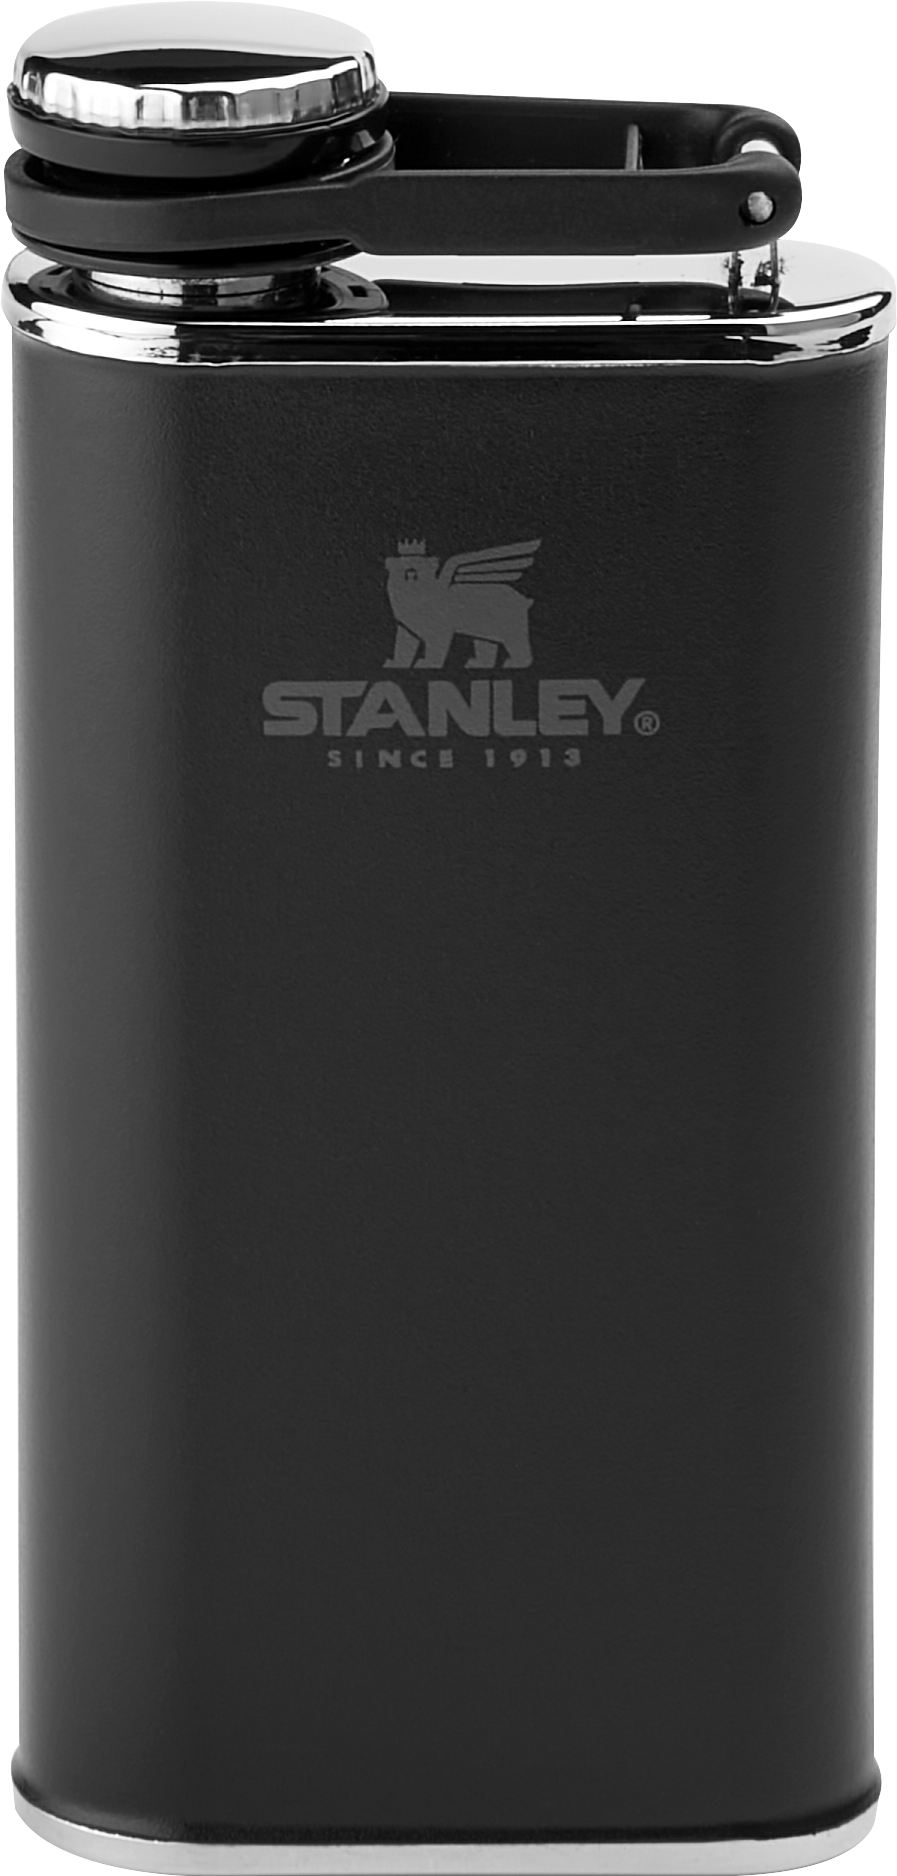 Stanley Easy Fill Wide Mouth Hip Flask, Black 8 oz. - Men's Accessories